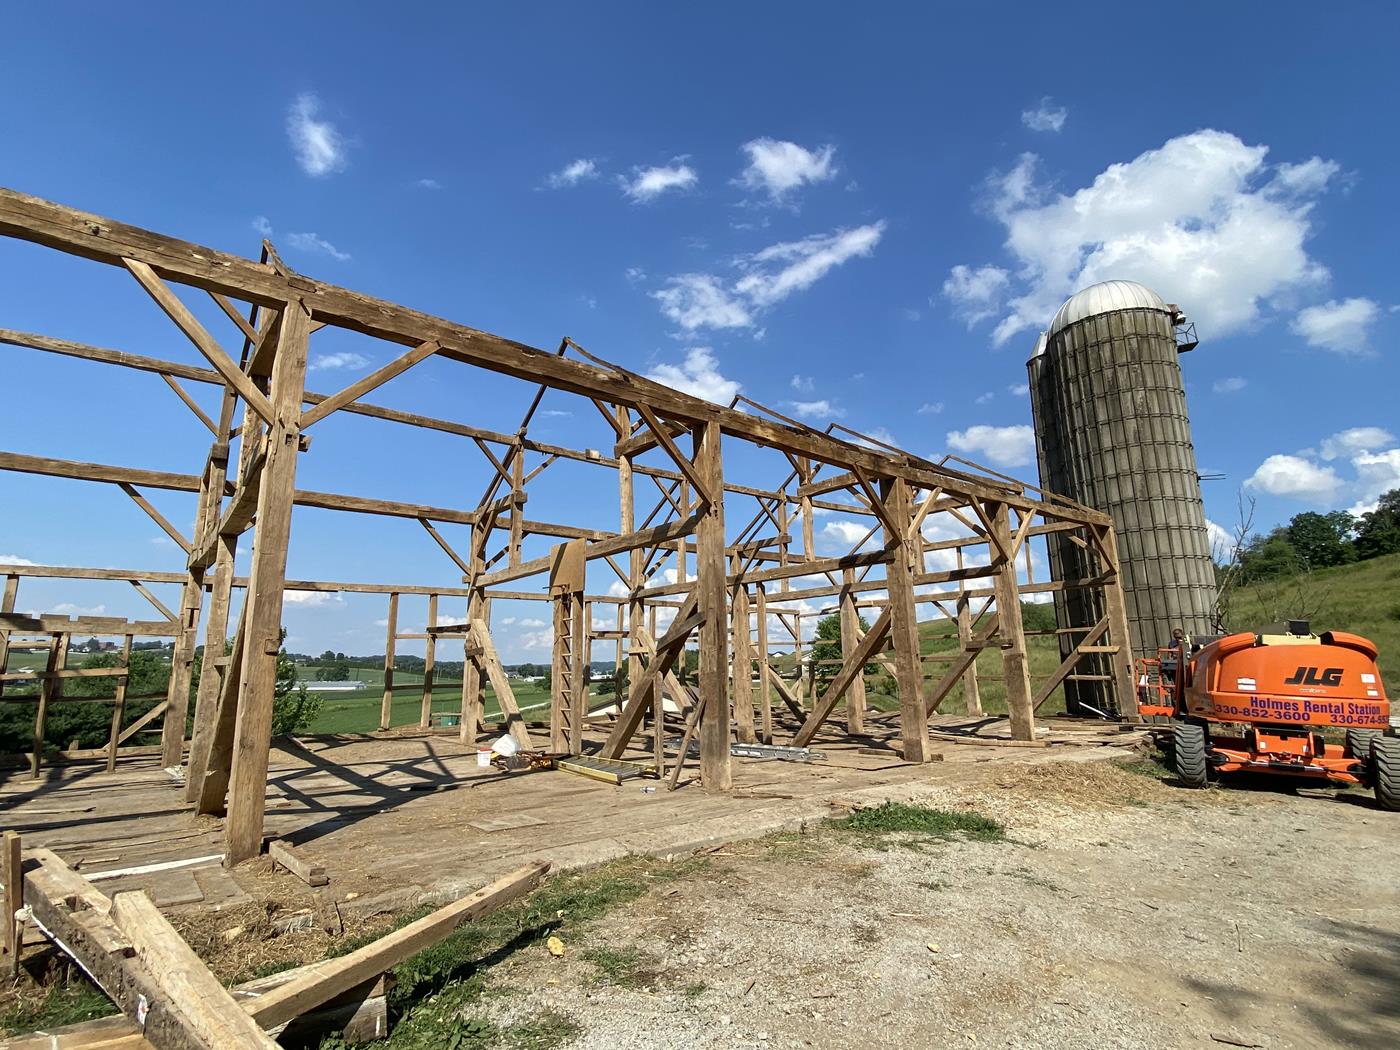 https://www.ohiovalleybarnsalvage.com/images/Beachy Historic Ohio Barn Frame